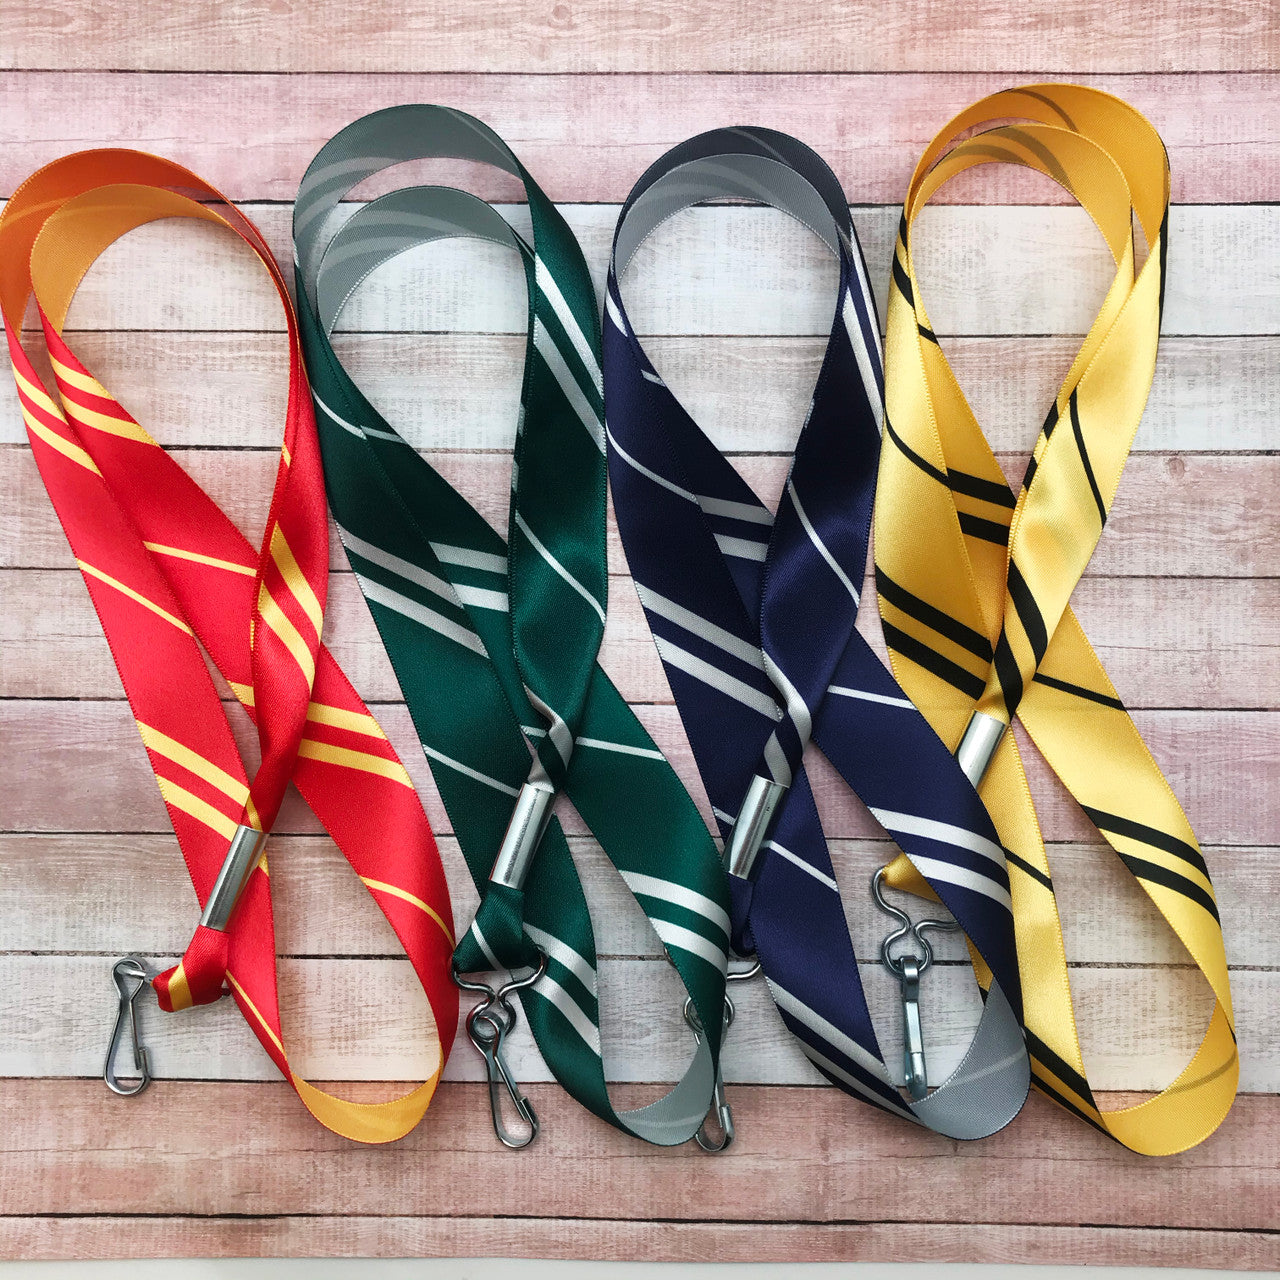 Harry Potter ribbon lanyards value pack of 4 printed on 7/8